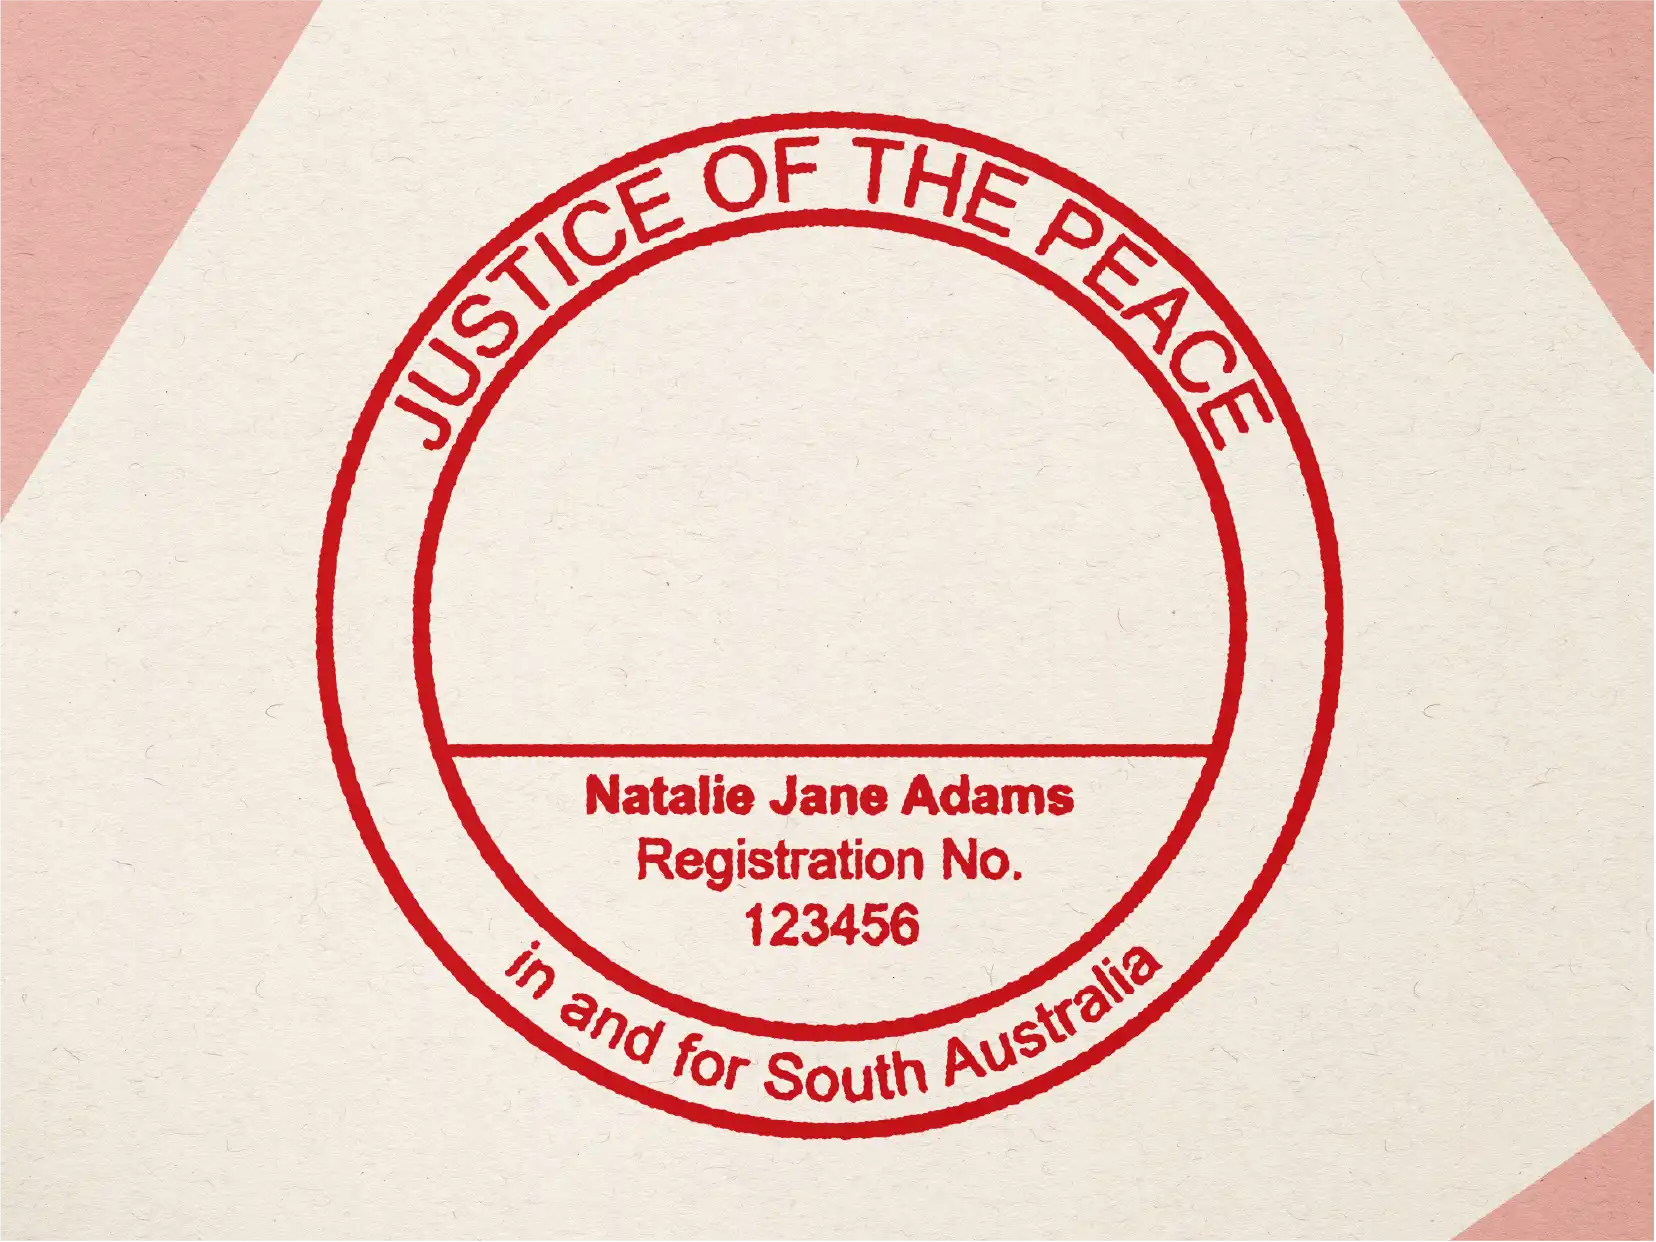 Round Justice Of The Peace rubber Stamp